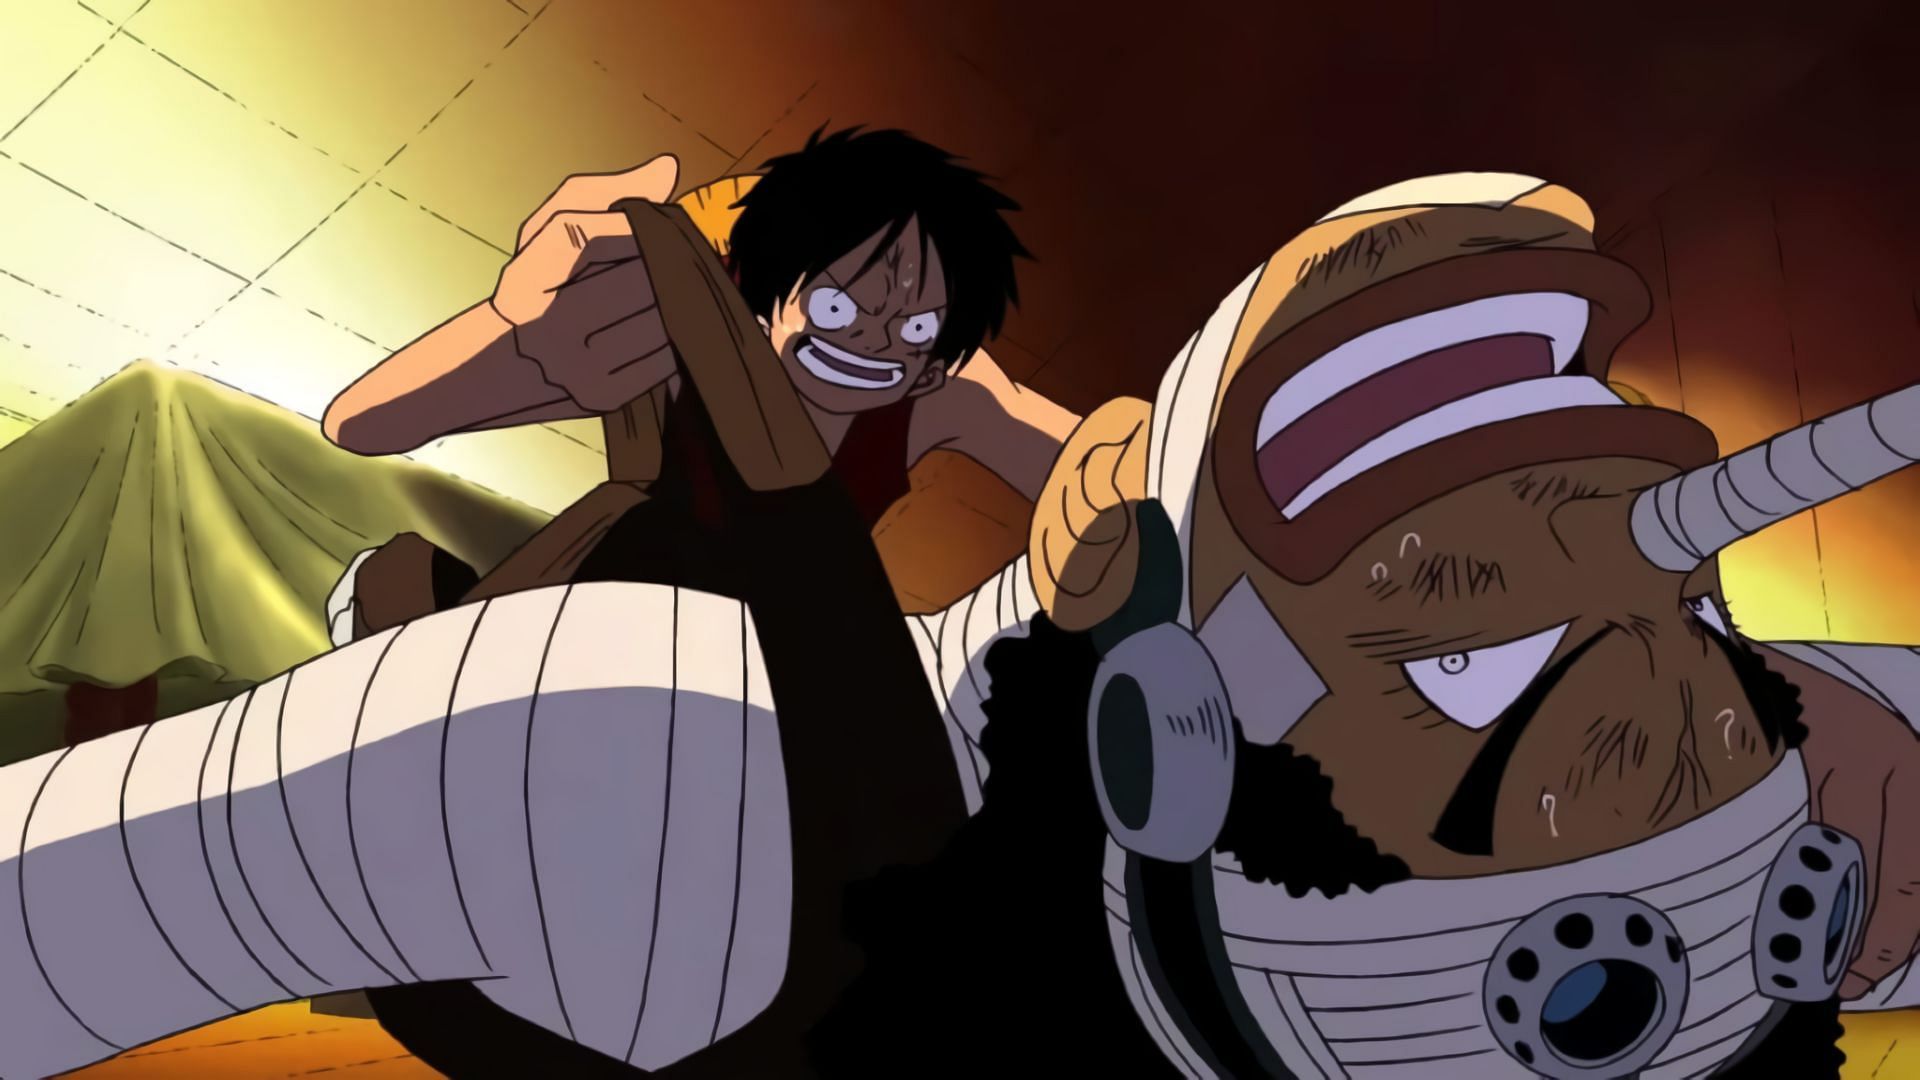 Luffy and Usopp as seen in One Piece (Image via Toei Animation)